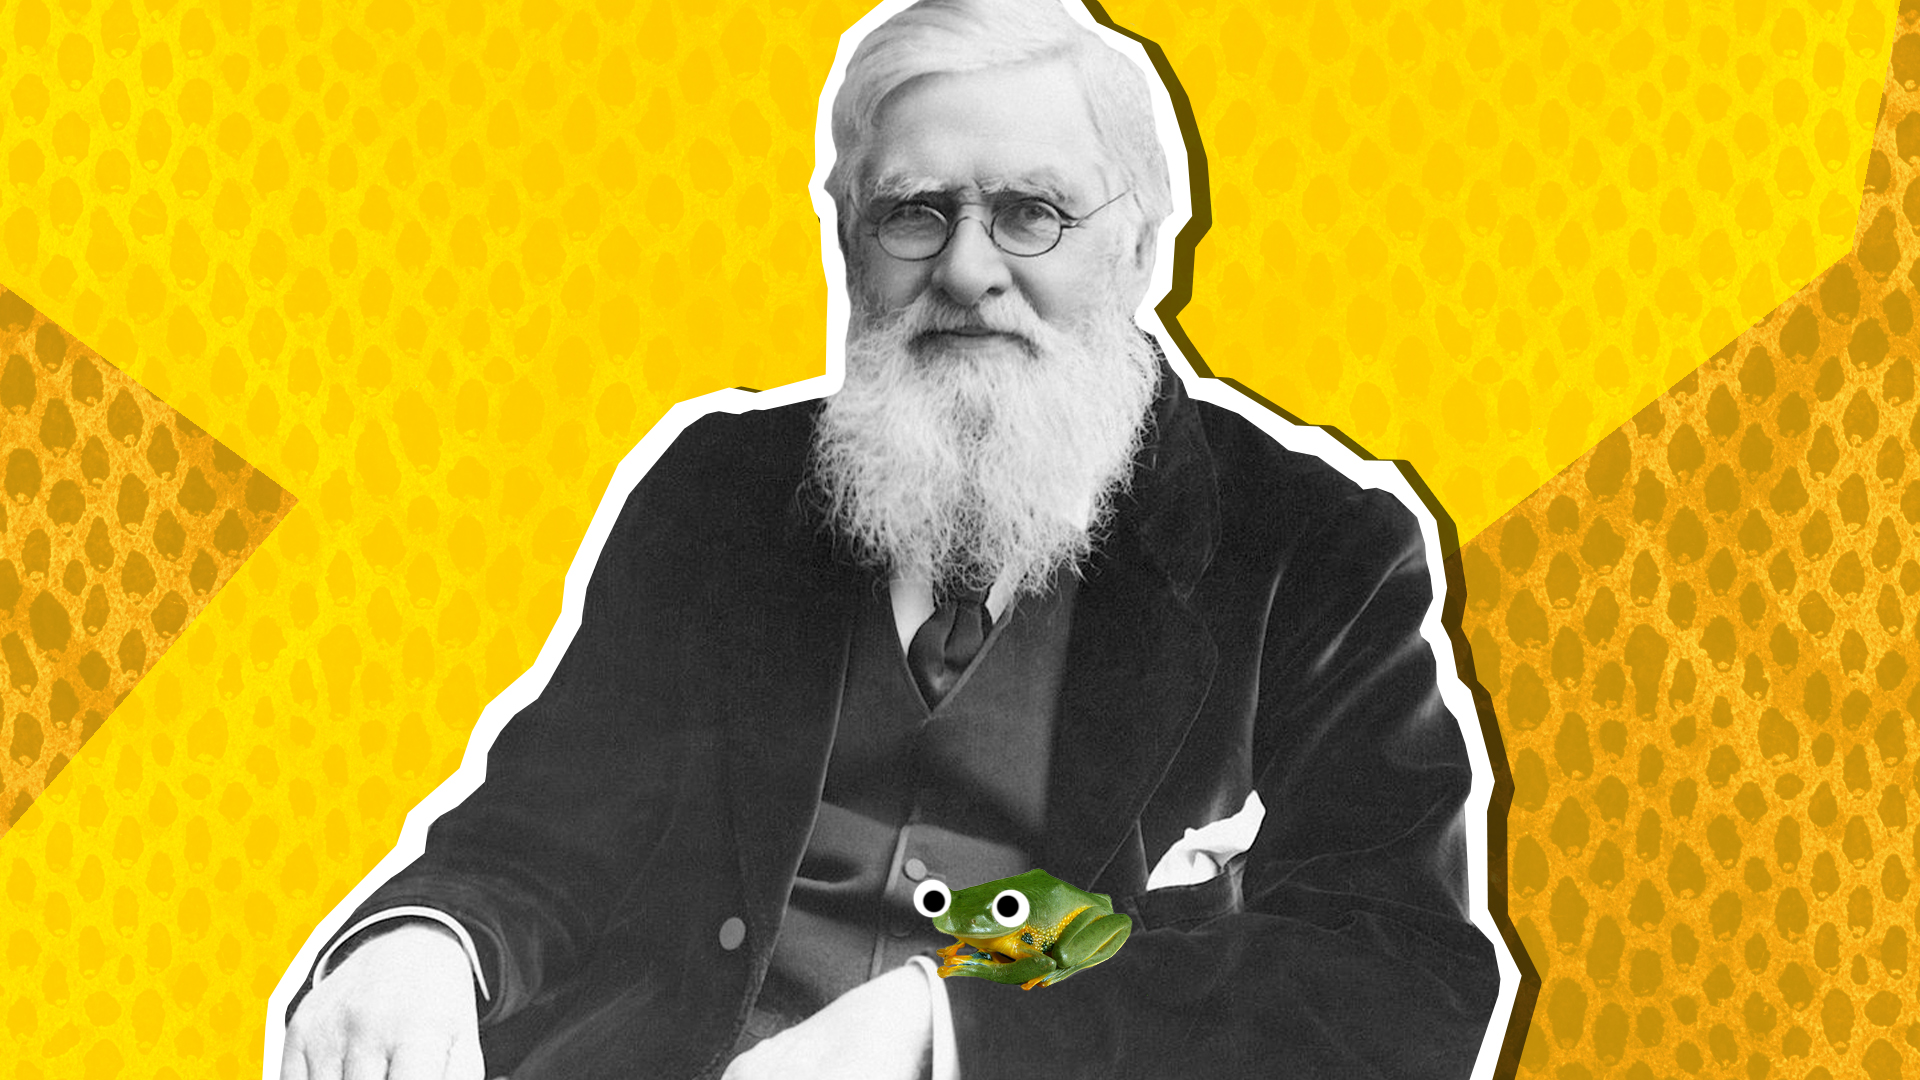 The famous biologist Wallace